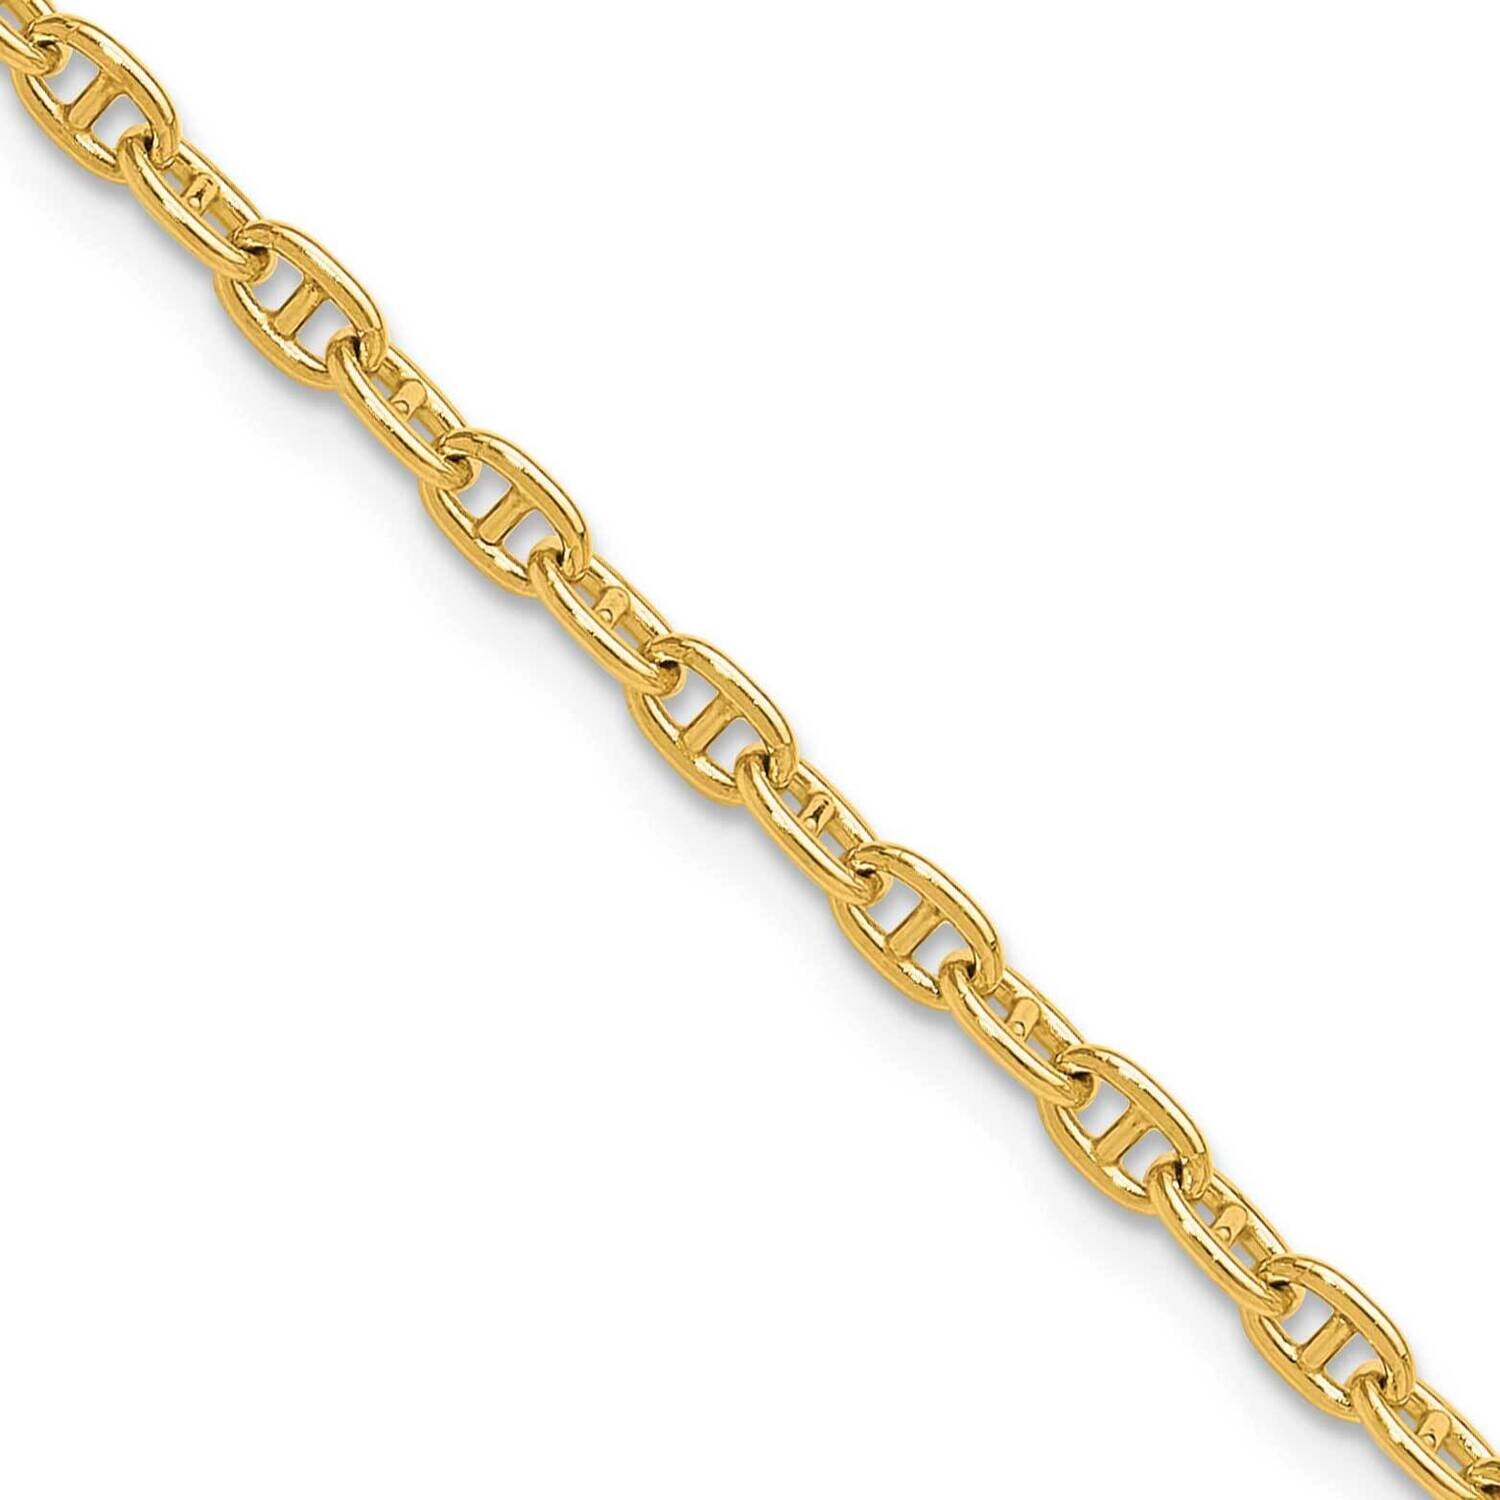 3.0mm Mariners Link Chain 18 Inch 14k Gold MA080-18